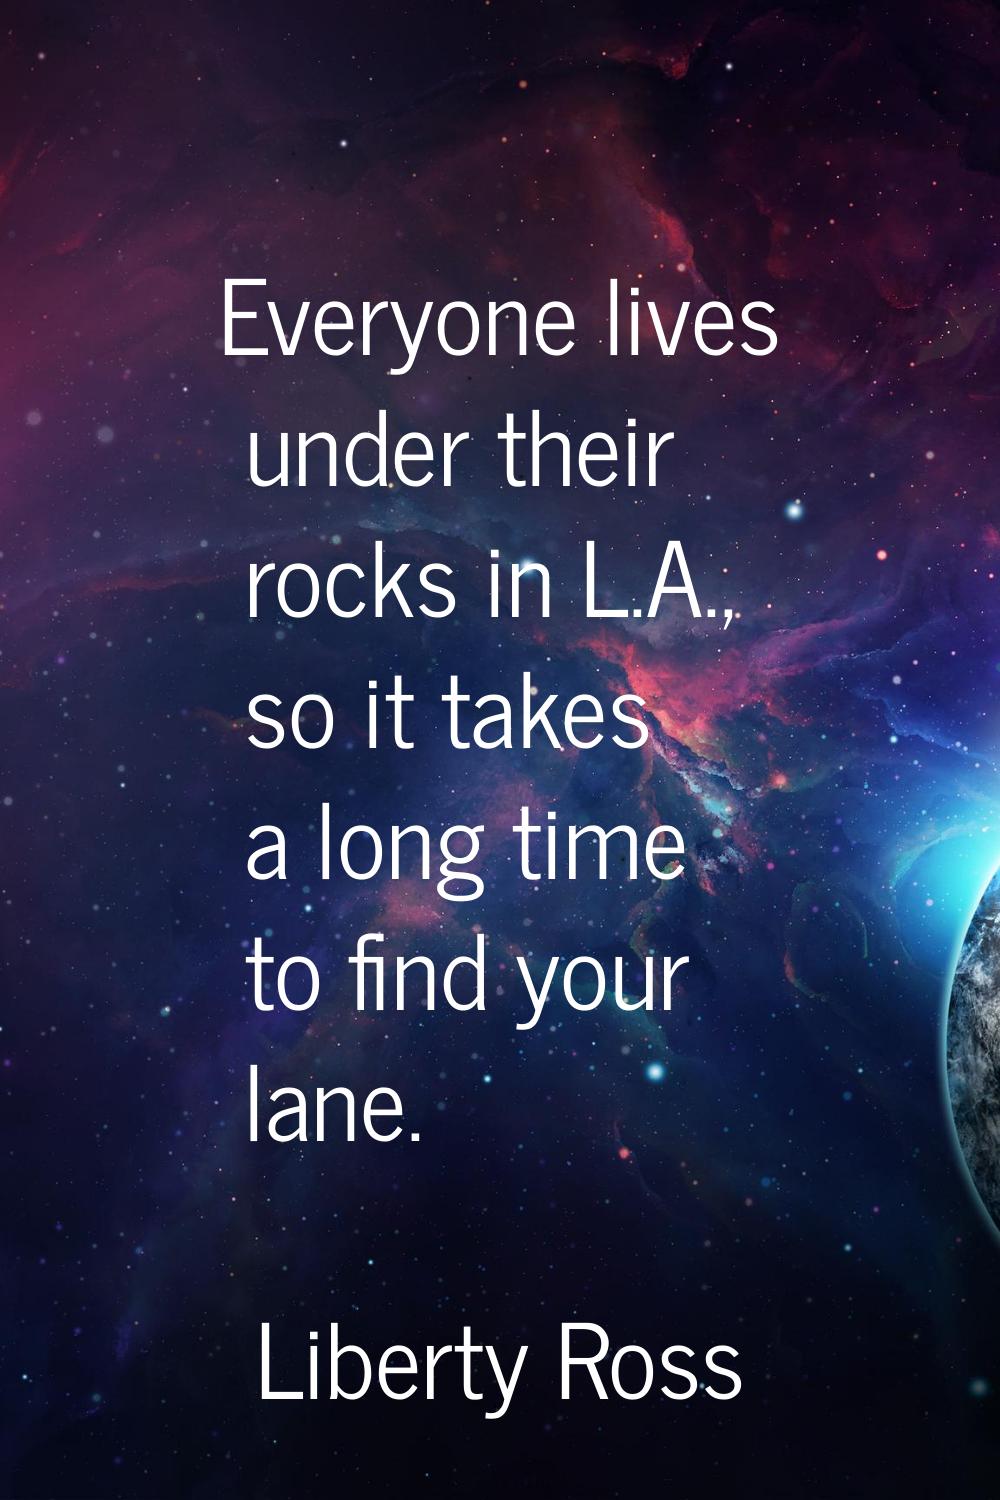 Everyone lives under their rocks in L.A., so it takes a long time to find your lane.